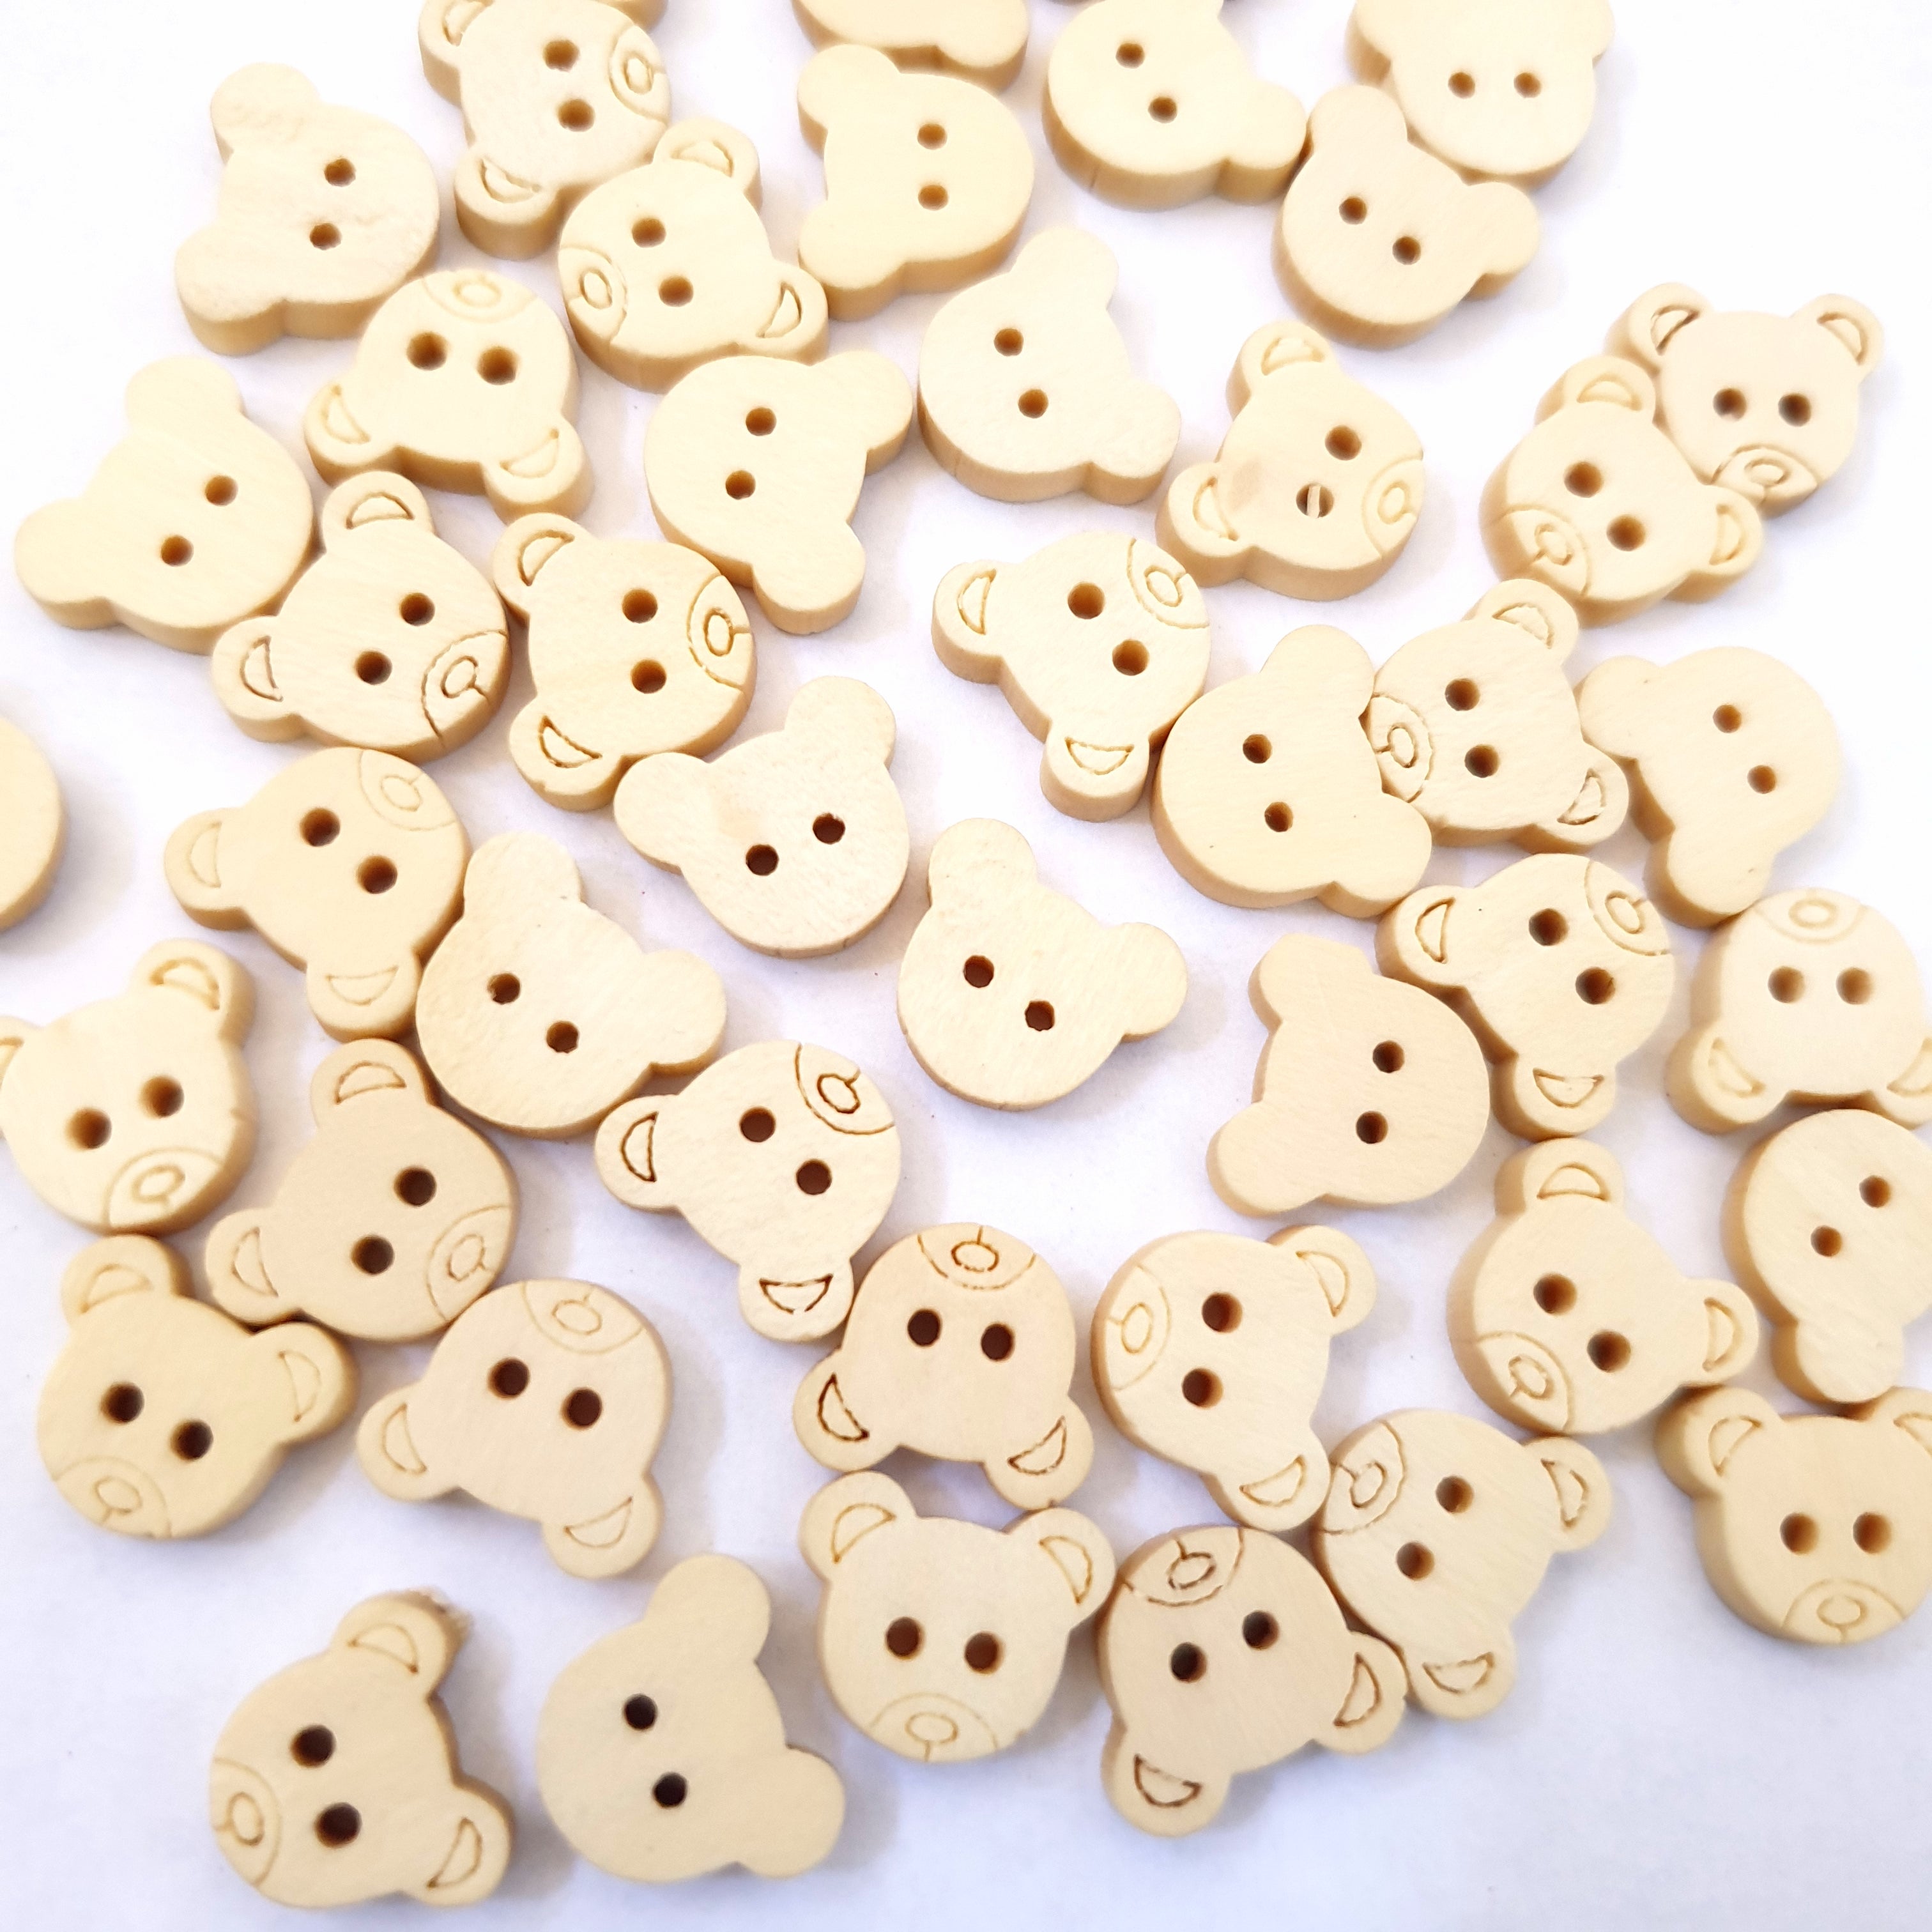 MajorCrafts 48pcs 13mm Teddy Bear Light Brown 2 Holes Small Sewing Wooden Buttons